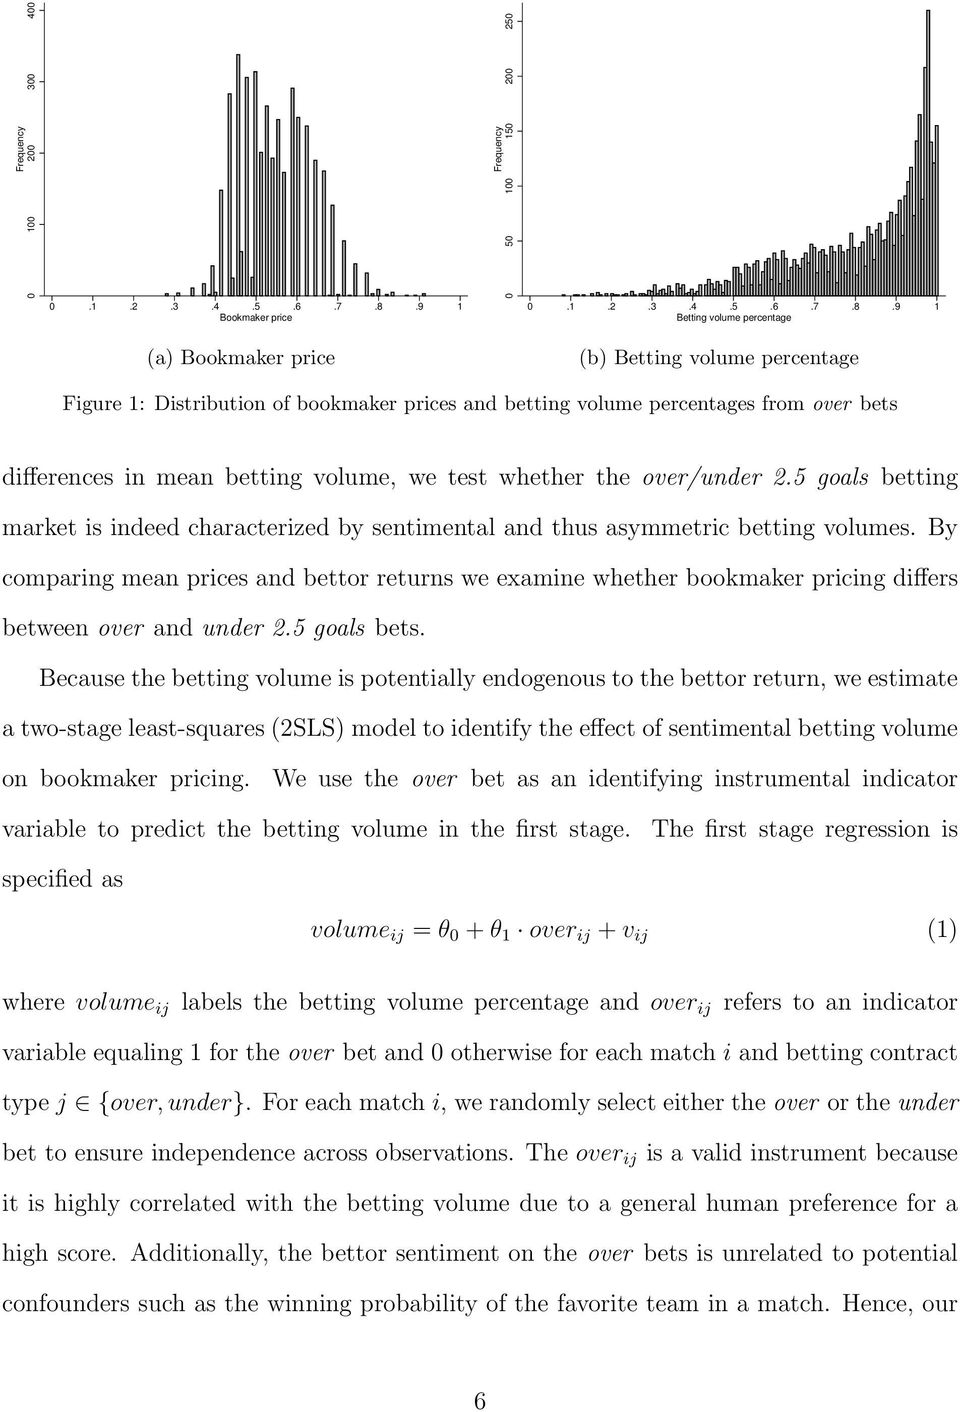 9 1 Betting volume percentage (a) Bookmaker price (b) Betting volume percentage Figure 1: Distribution of bookmaker prices and betting volume percentages from over bets differences in mean betting